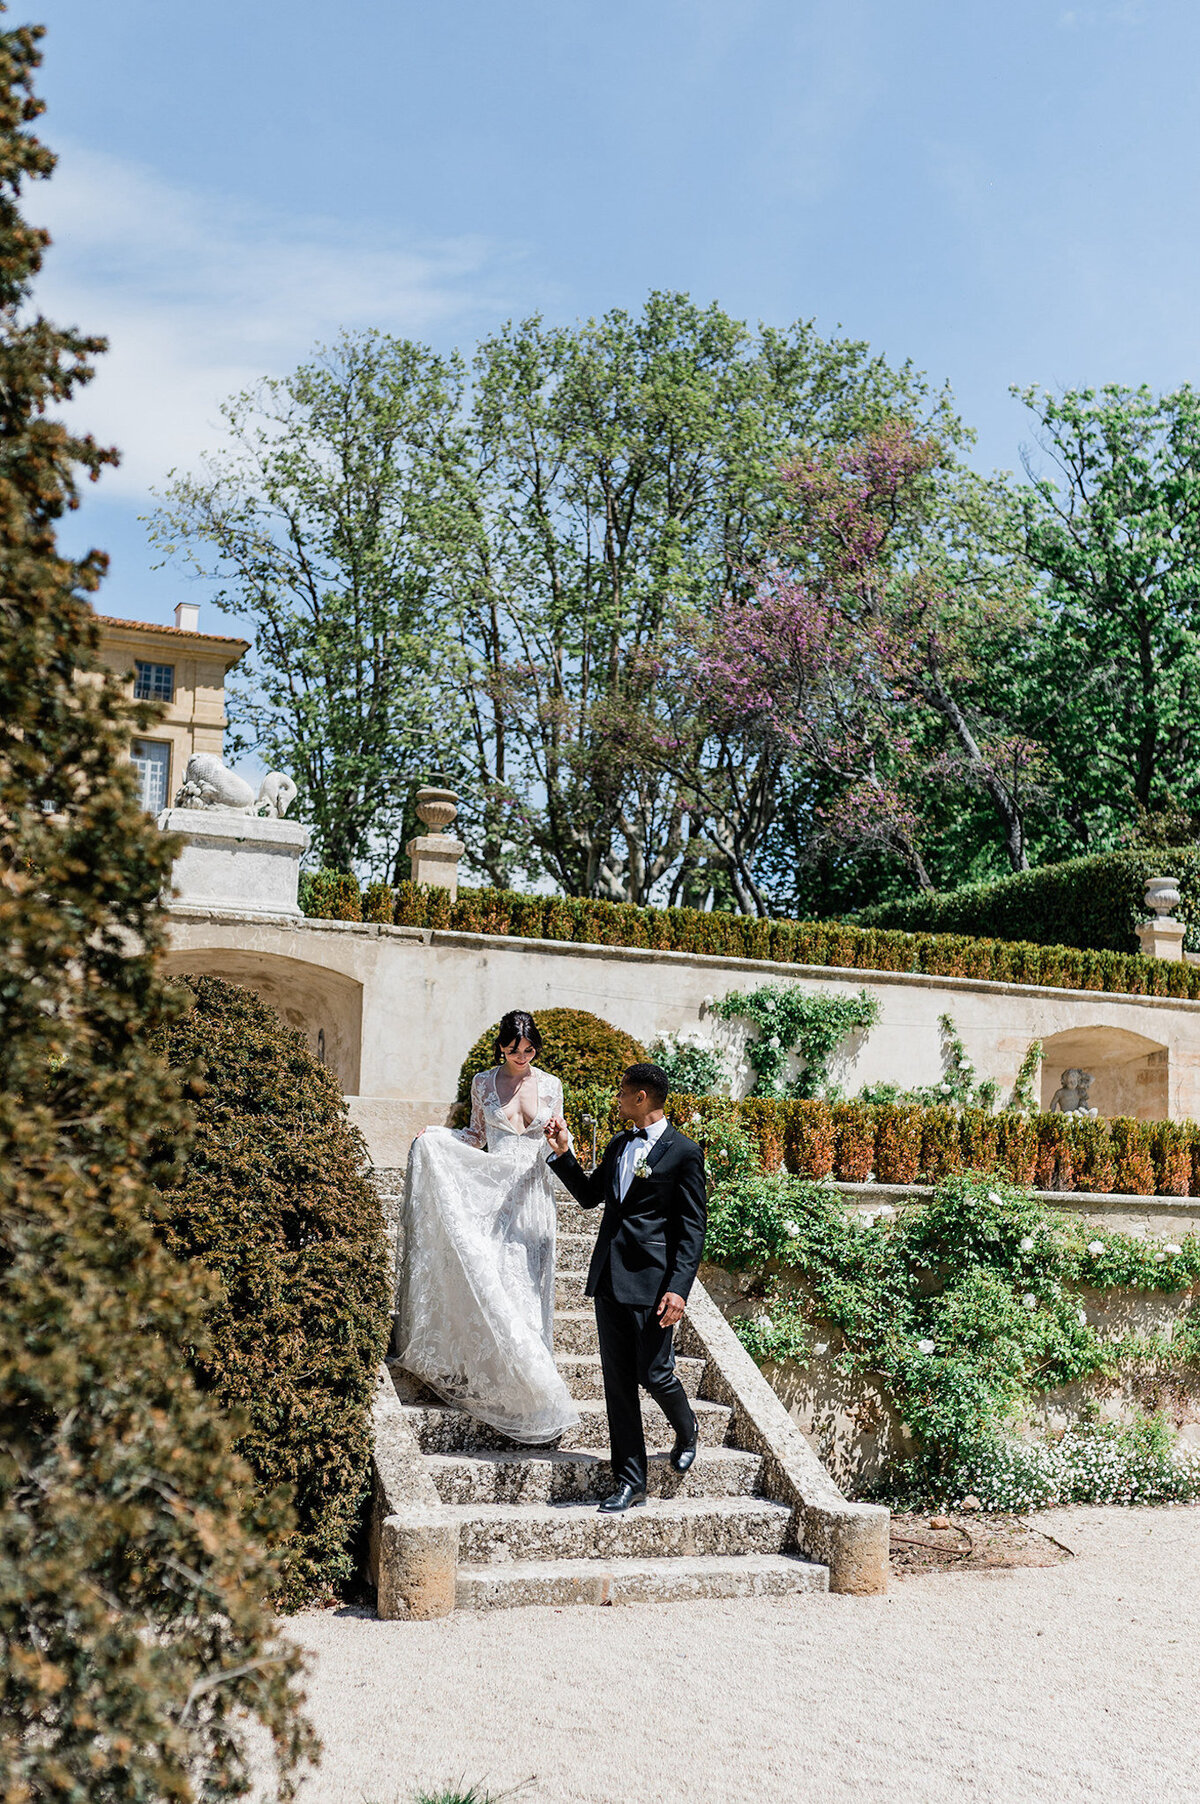 From grand celebrations to quiet exchanges, our luxury wedding photography in France portrays the genuine beauty of your love story. Our fine art lens turns fleeting moments into everlasting art.